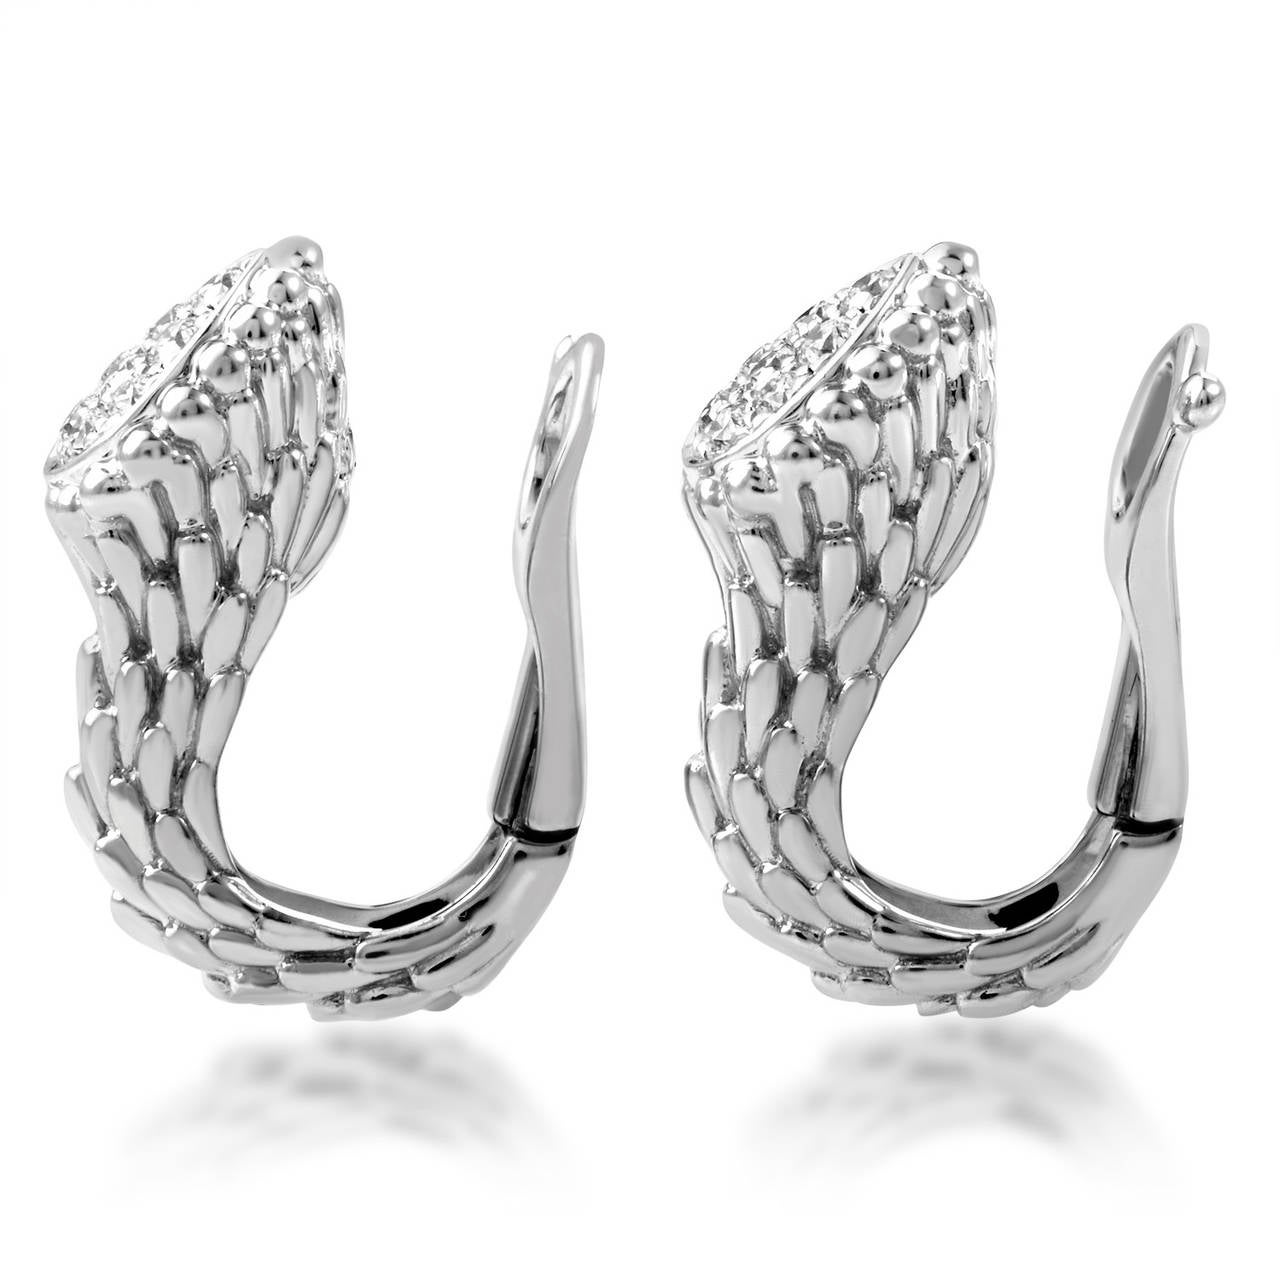 The Toi et Moi collection from Boucheron boasts gorgeous designs that are unlike any other. The earrings are made of carved 18K white gold and are decorated with .25 carats of shimmering white diamonds.